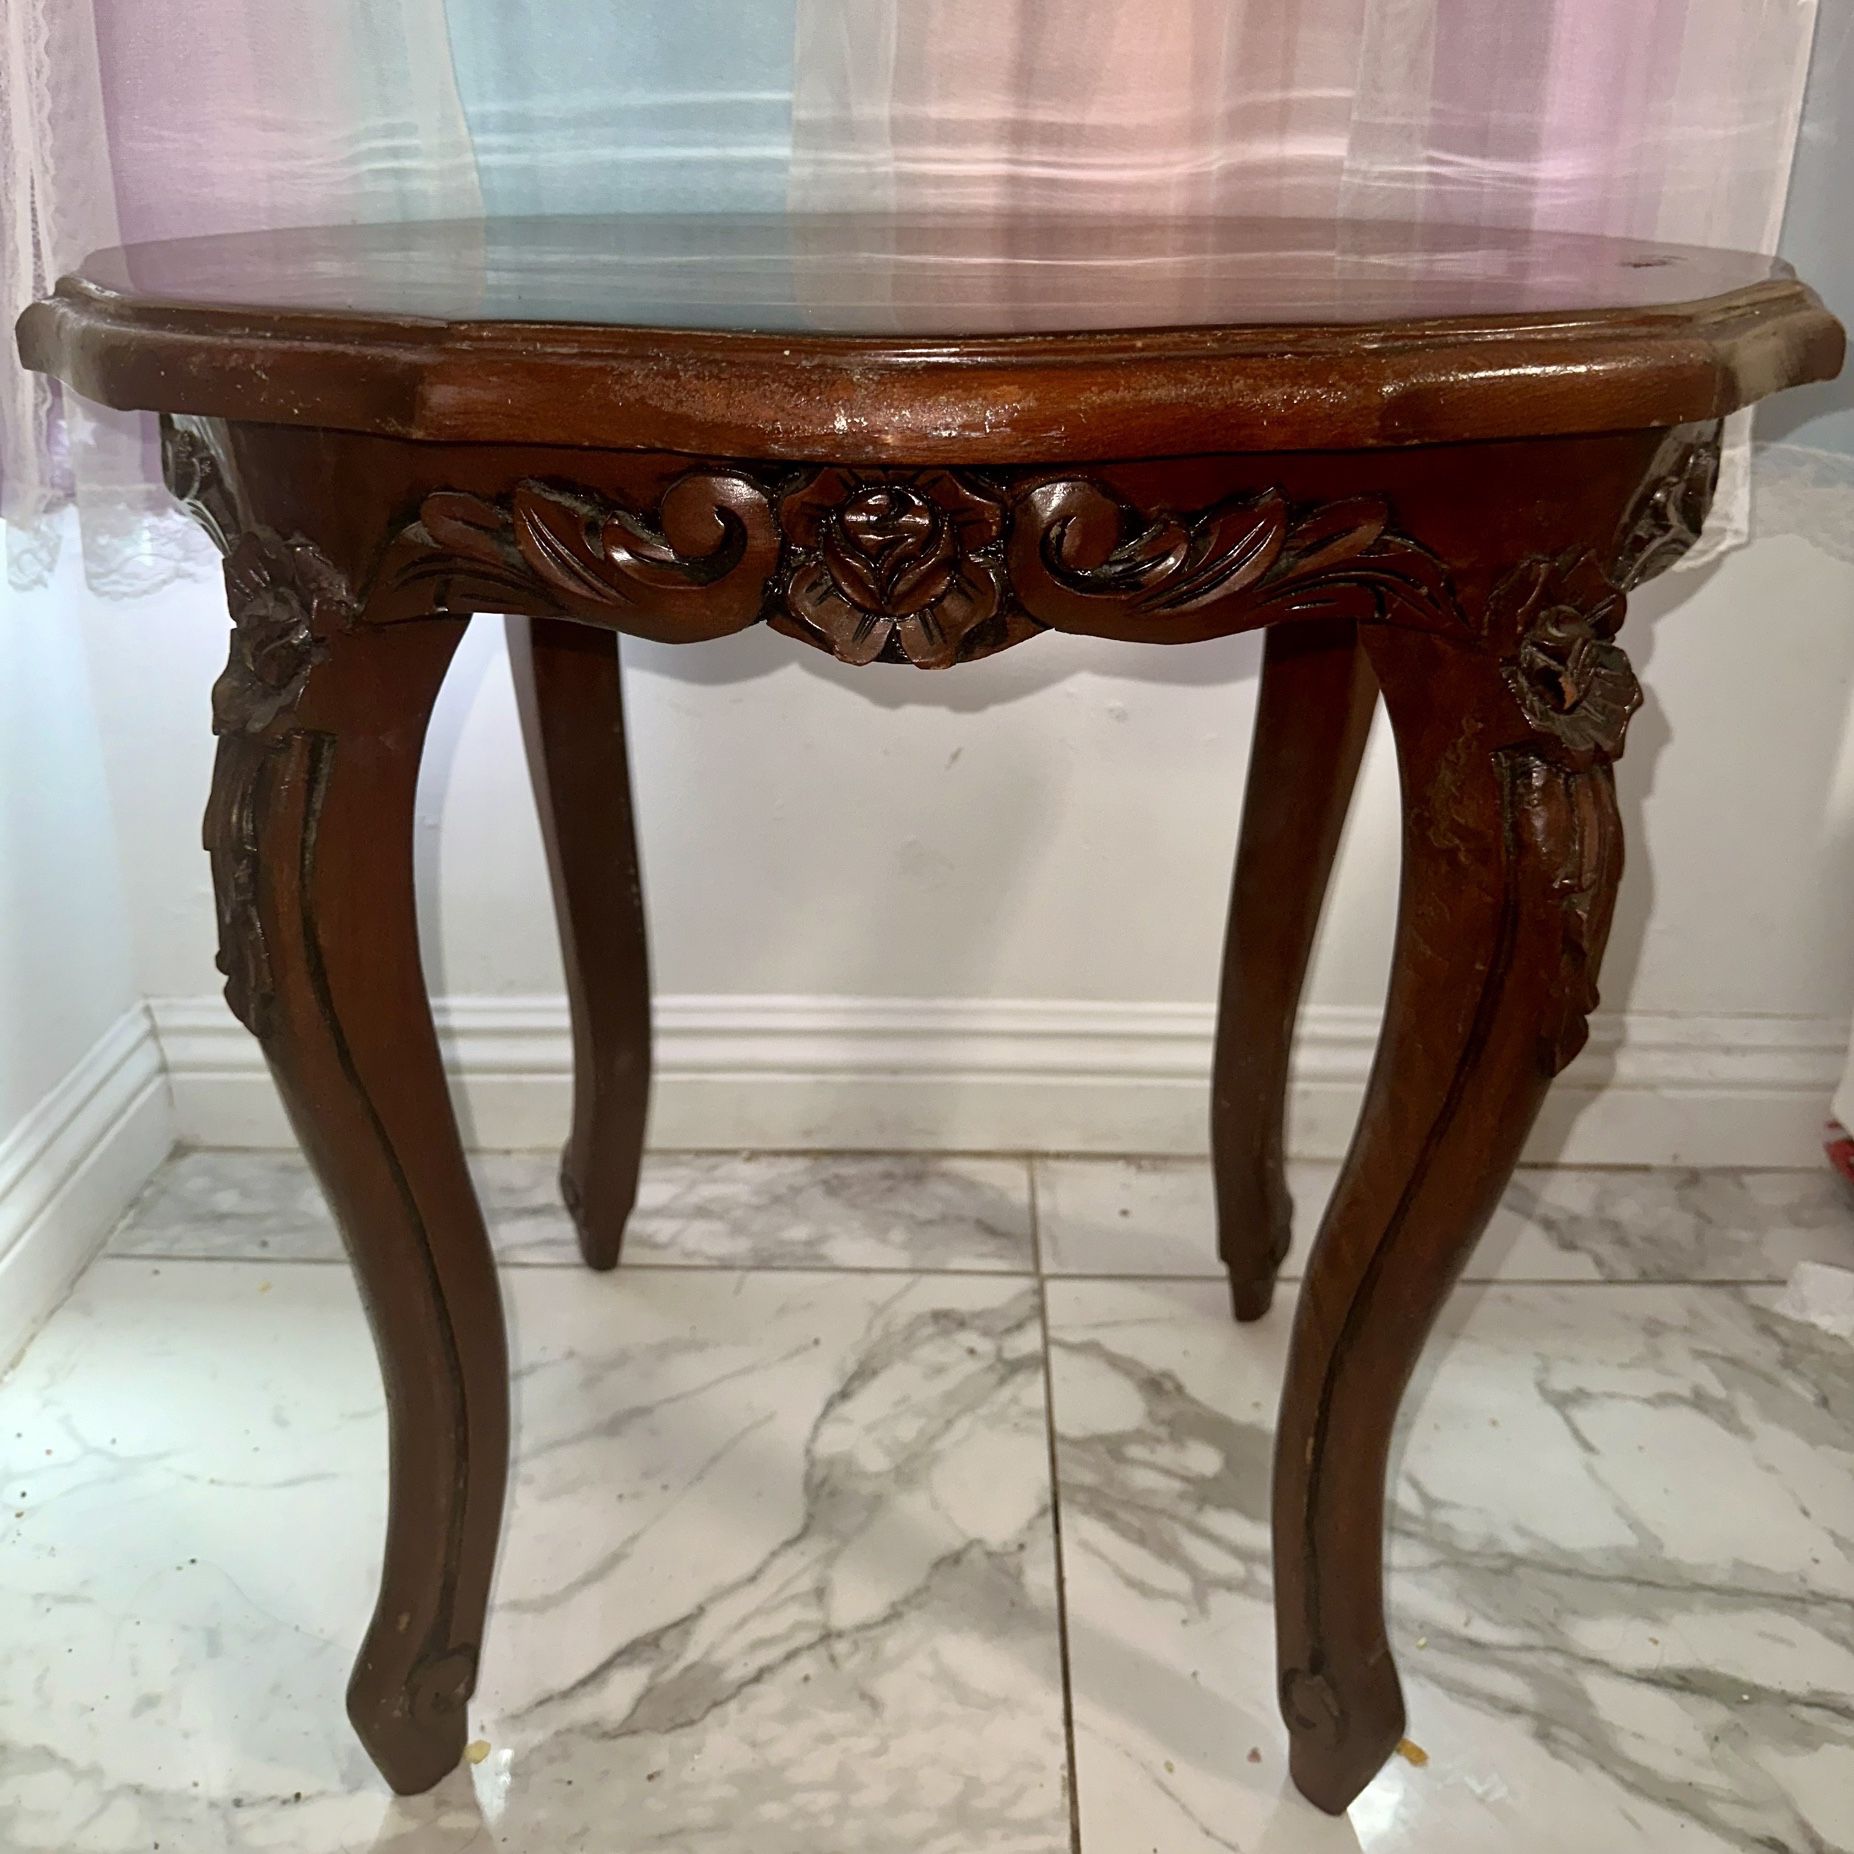 Antique 19th Century Rosewood Side Table 